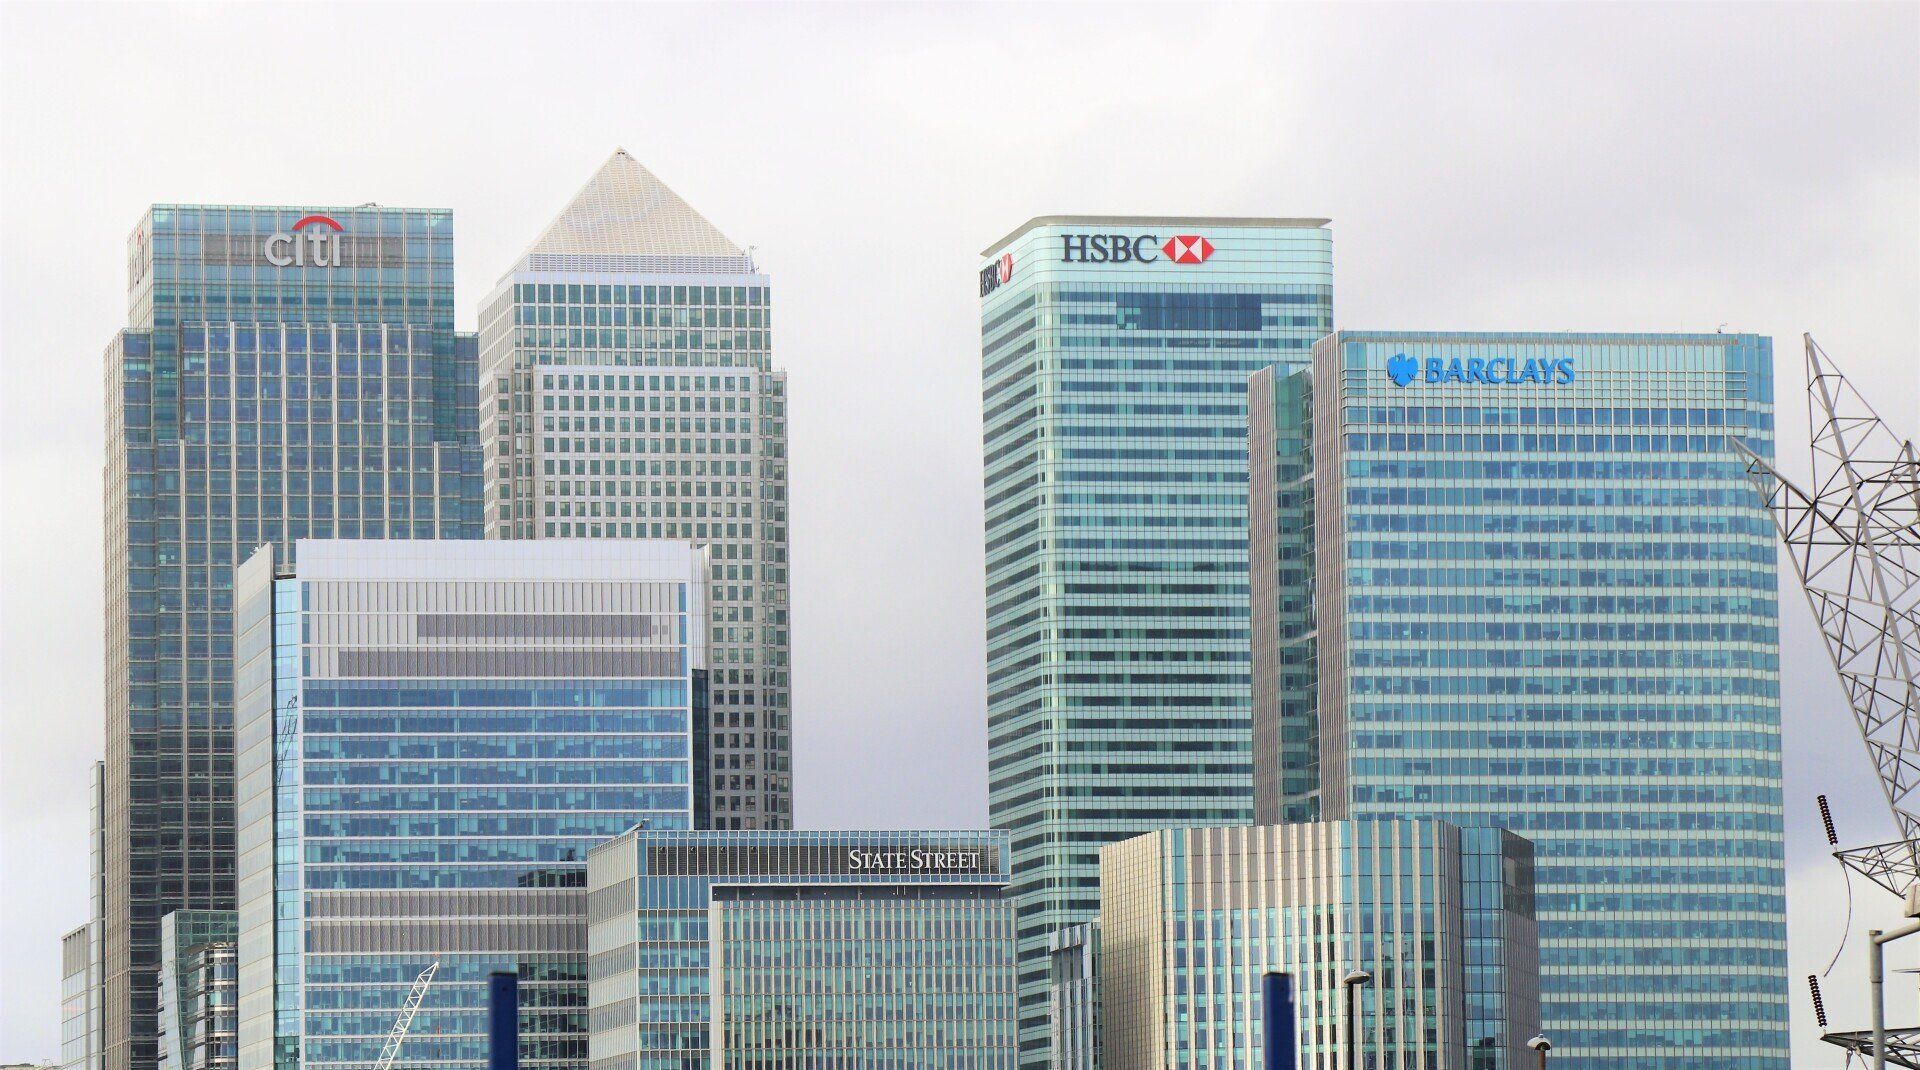 A city skyline with a hsbc bank building in the middle with a legal services